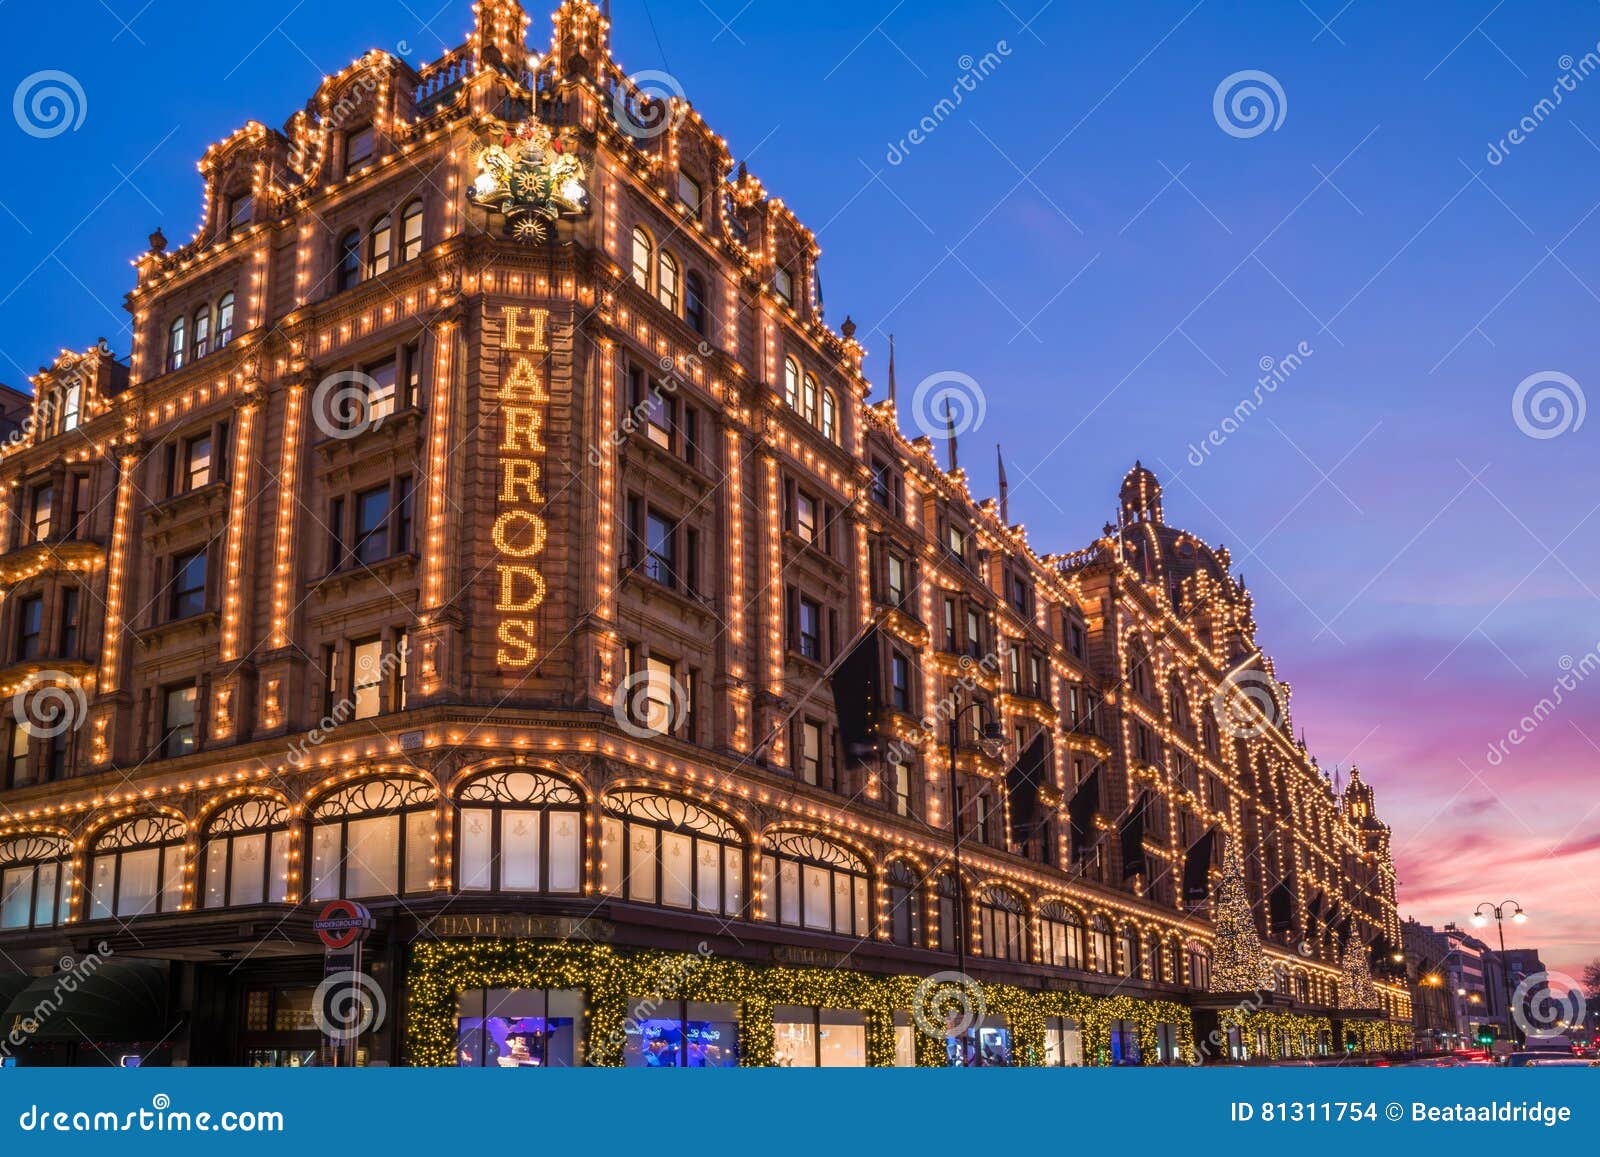 View of Harrods with Christmas Decorations Editorial Stock Image ...